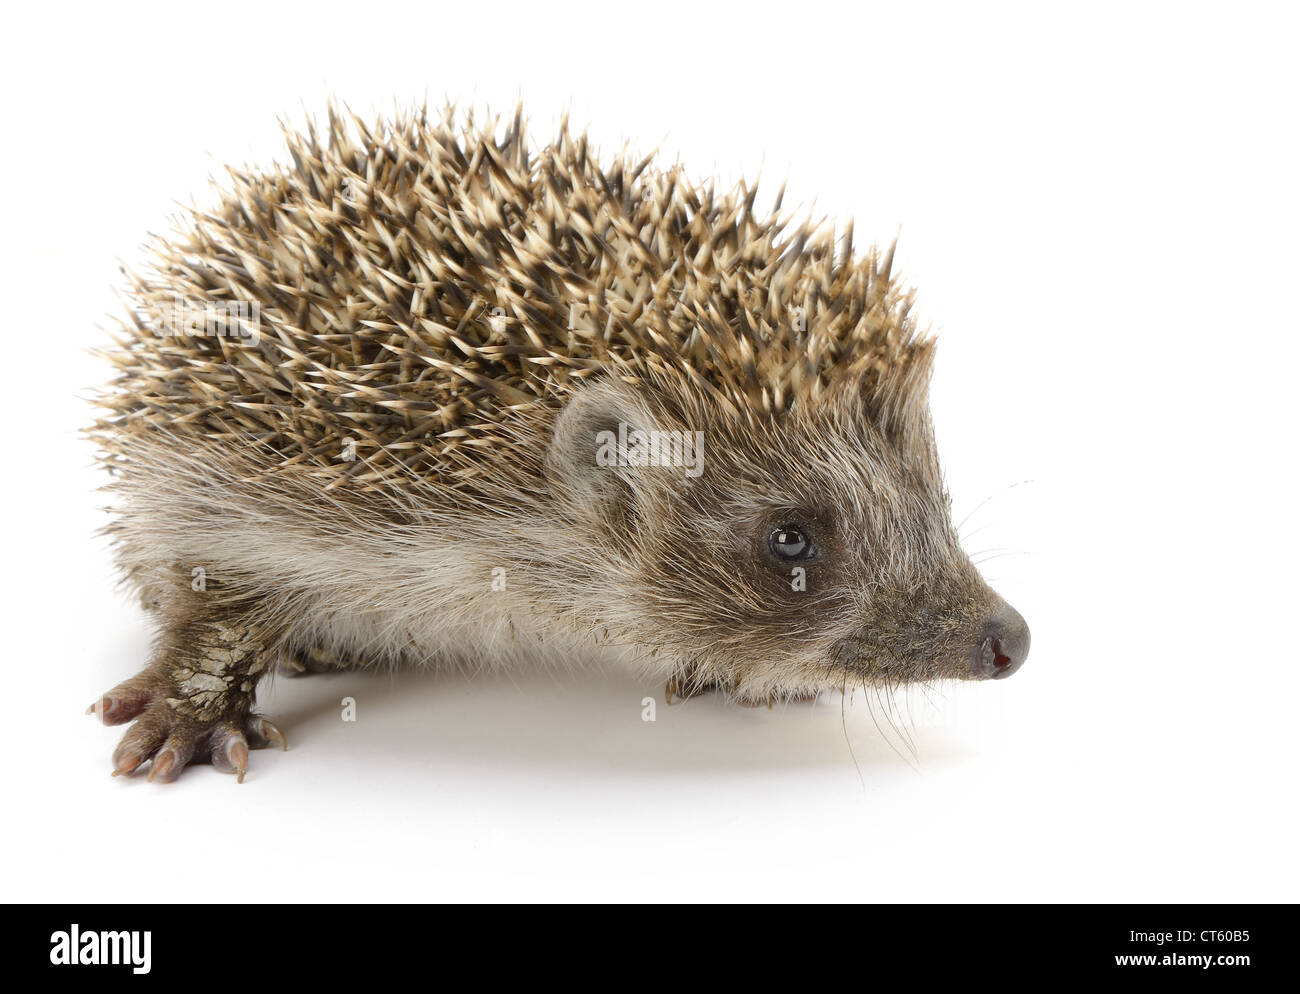 hedgehog isolated. Small mammal with spiny hairs on its back and sides  Stock Photo - Alamy